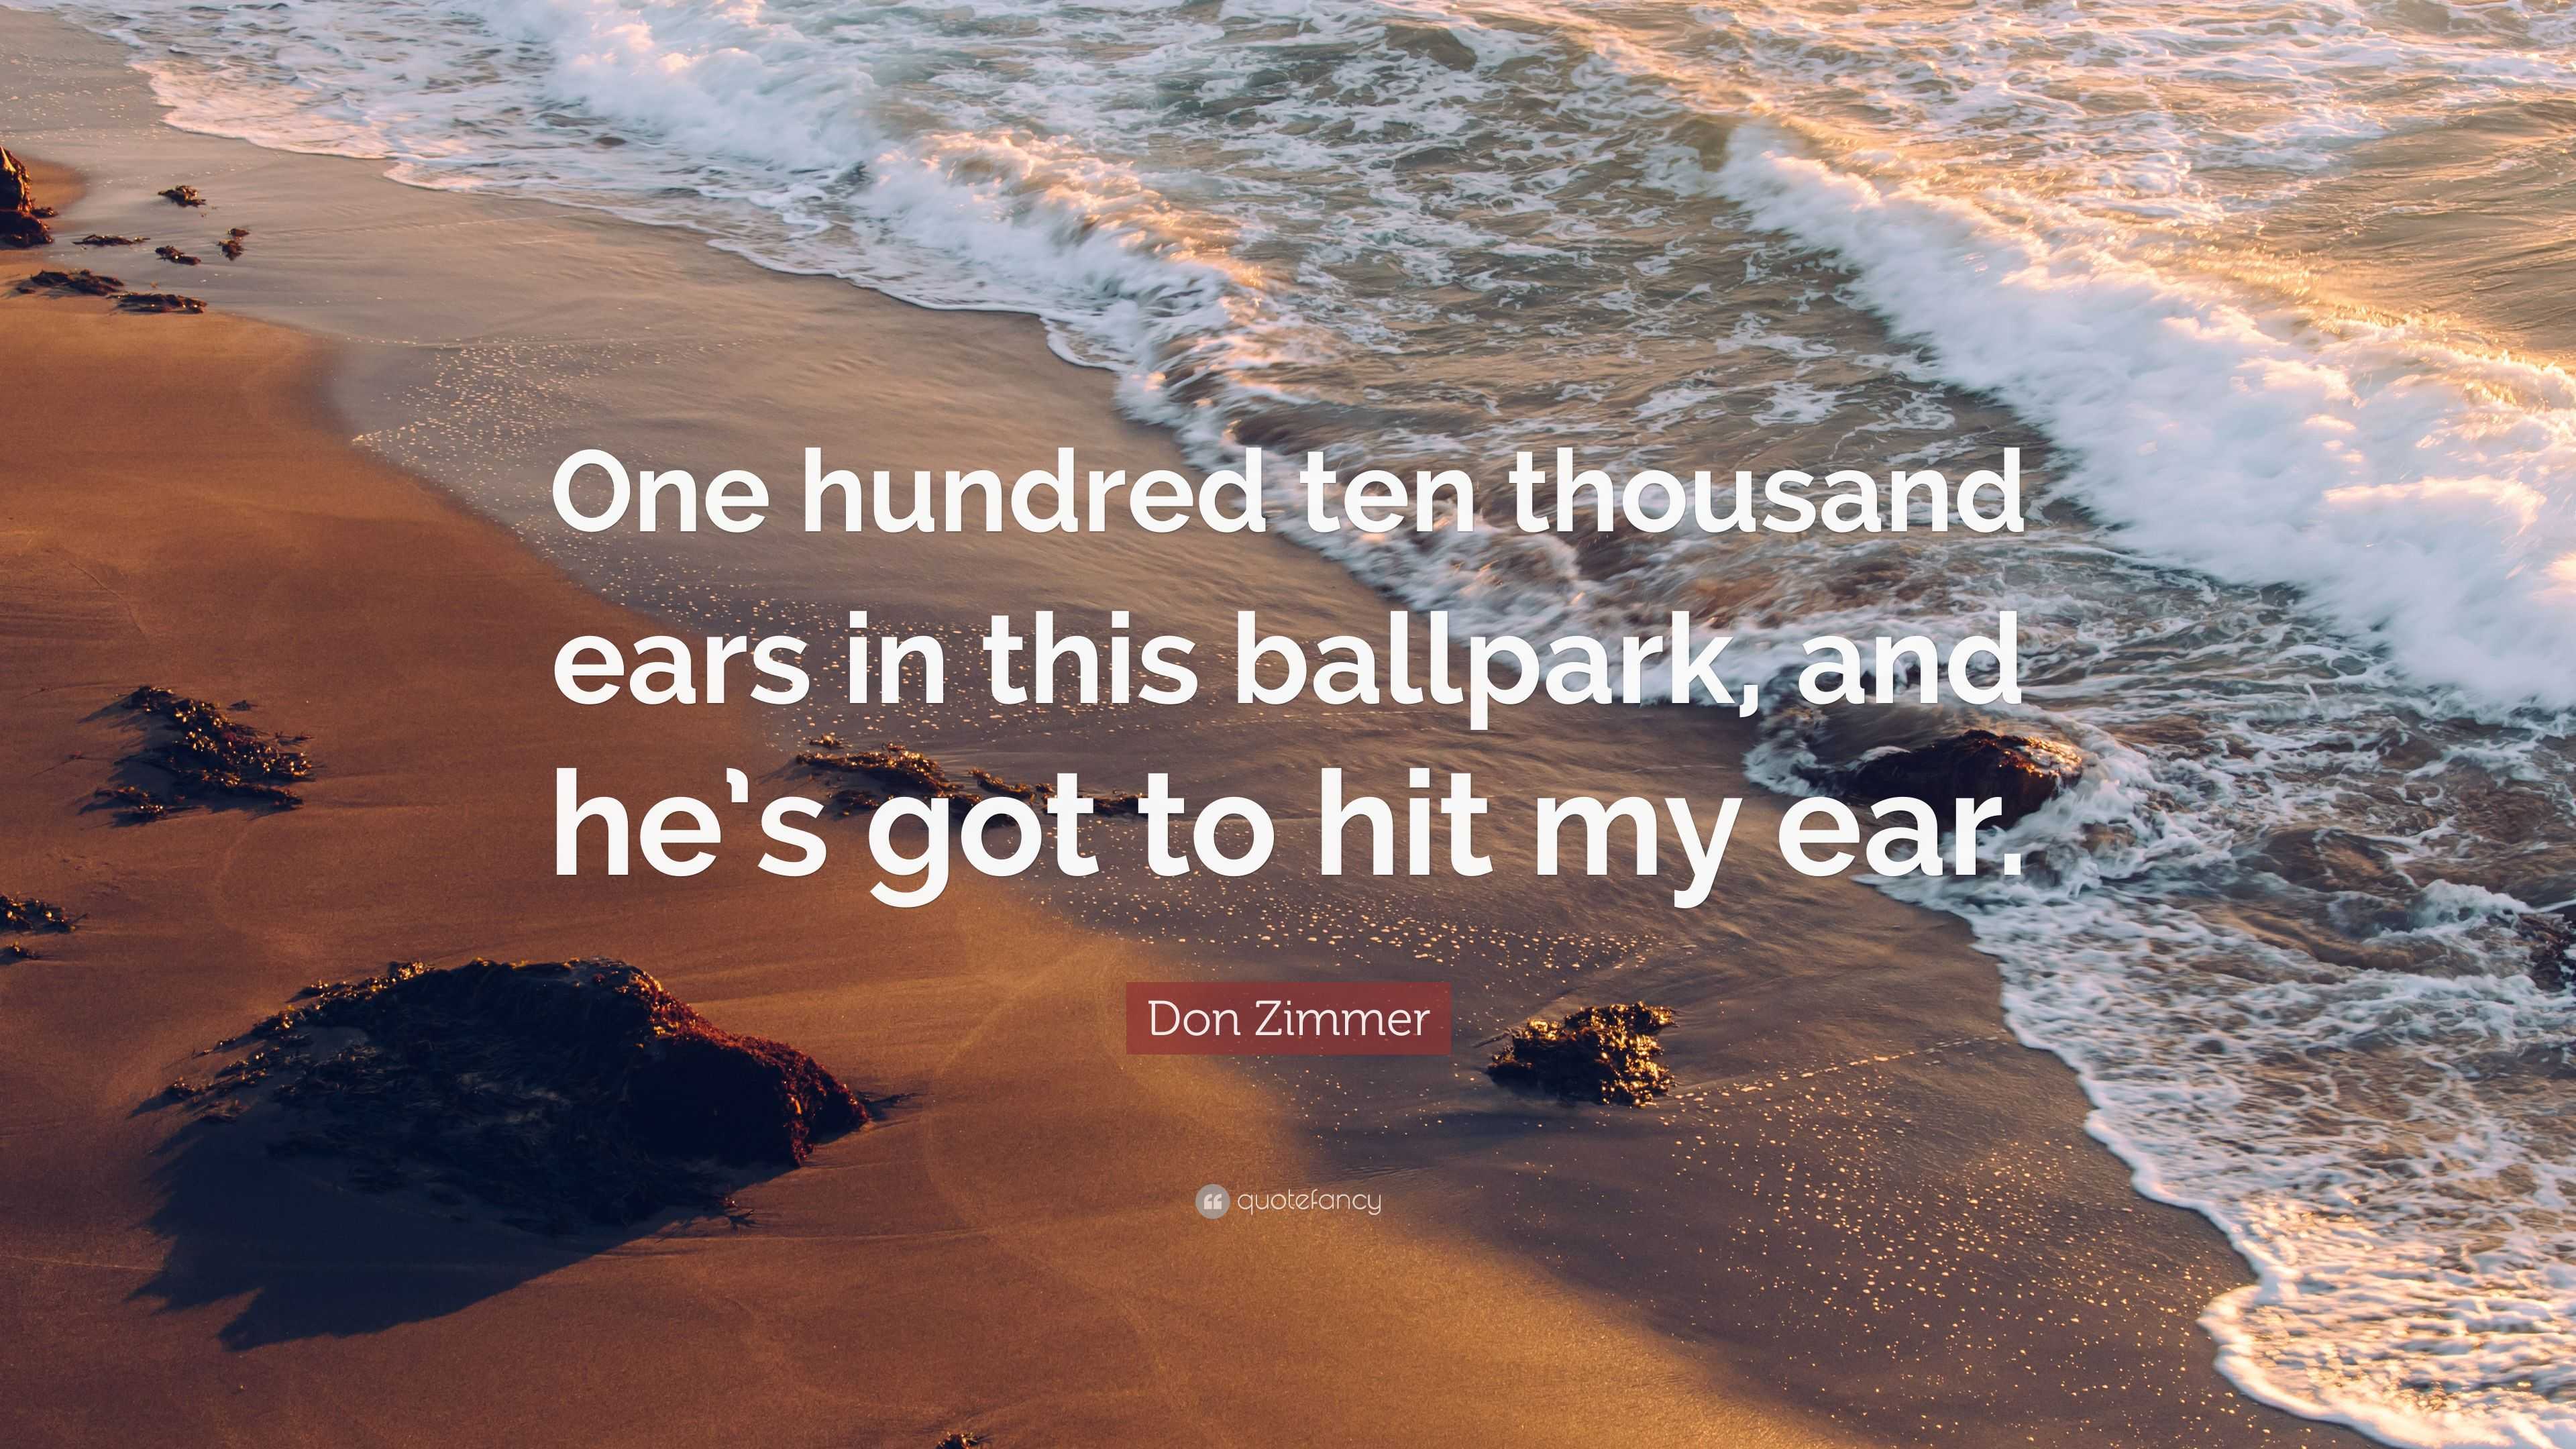 Don Zimmer Quote: “One hundred ten thousand ears in this ballpark, and he's  got to hit